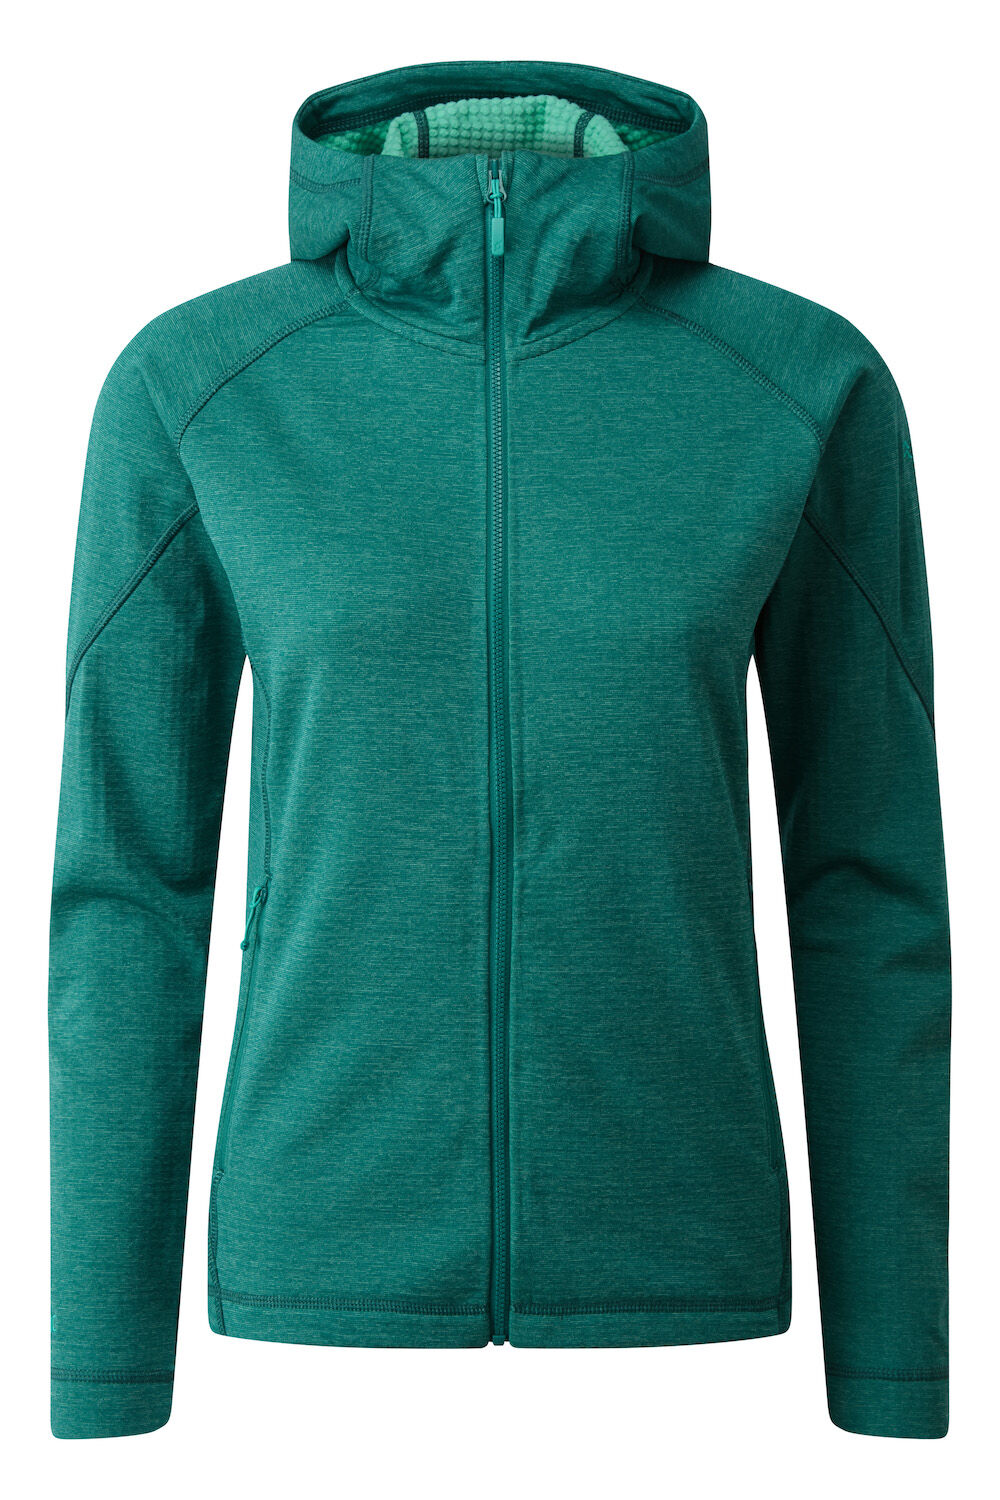 Rab - Nucleus Hoody - Giacca in pile - Donna